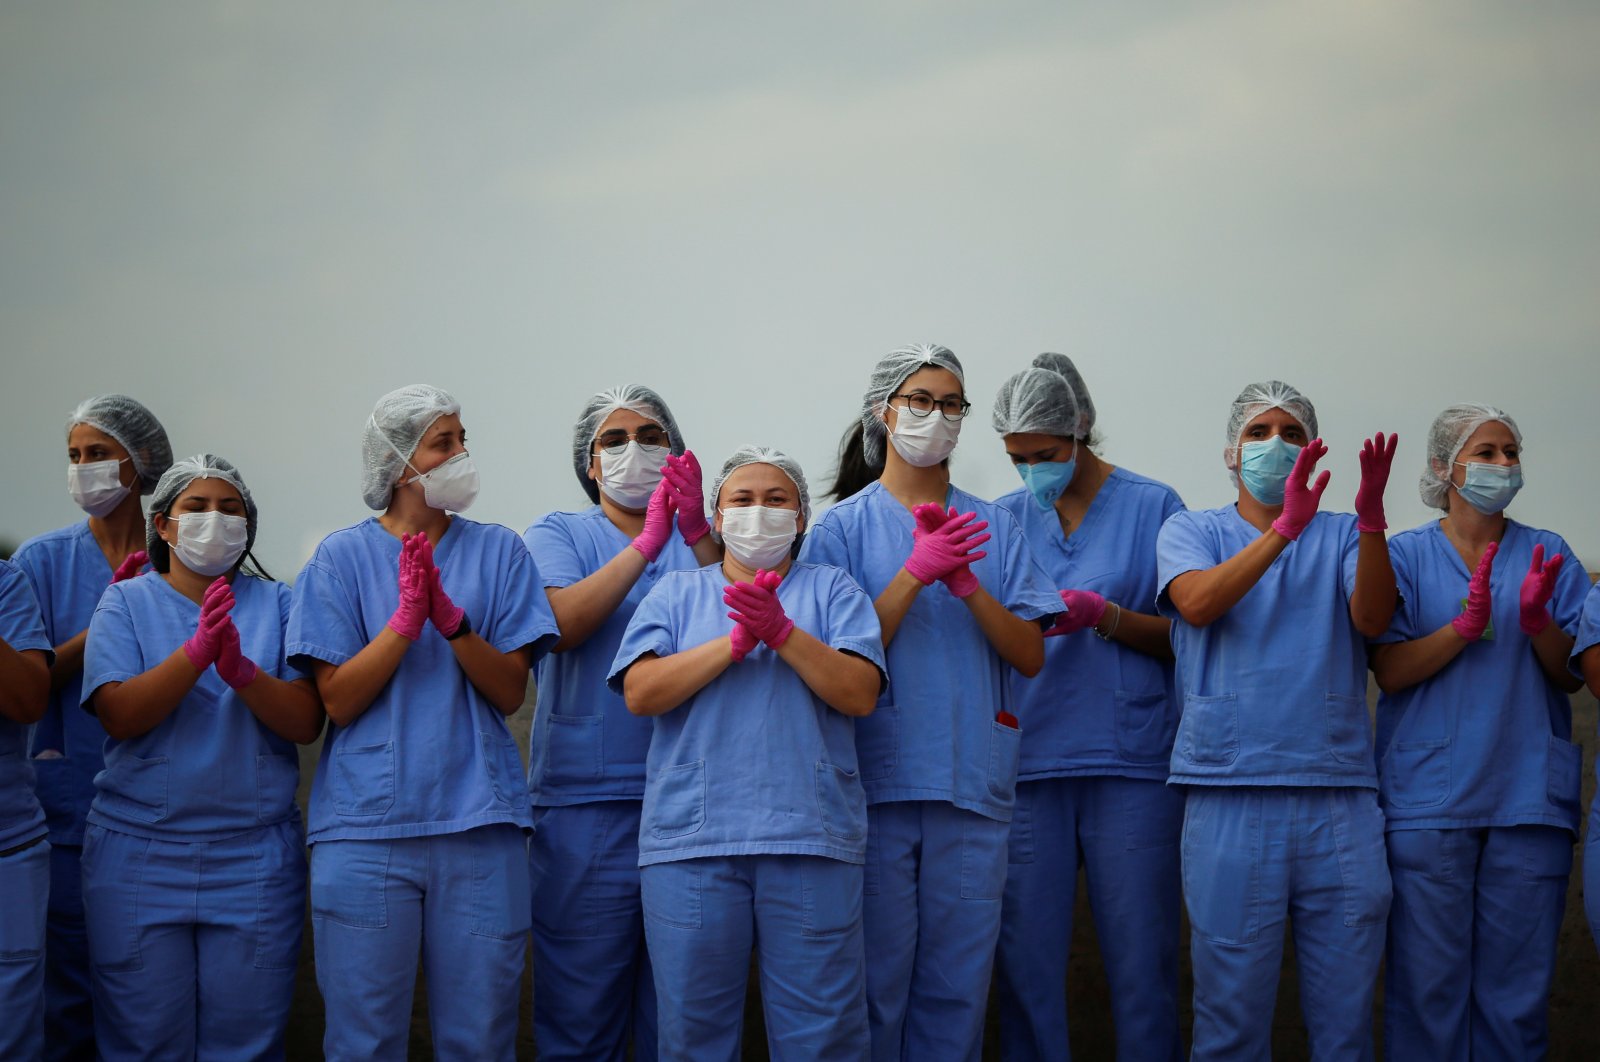 Health care workers celebrate as the last COVID-19 patients leave a temporary field hospital in Brasilia, Brazil, Oct. 15, 2020. (Reuters Photo)